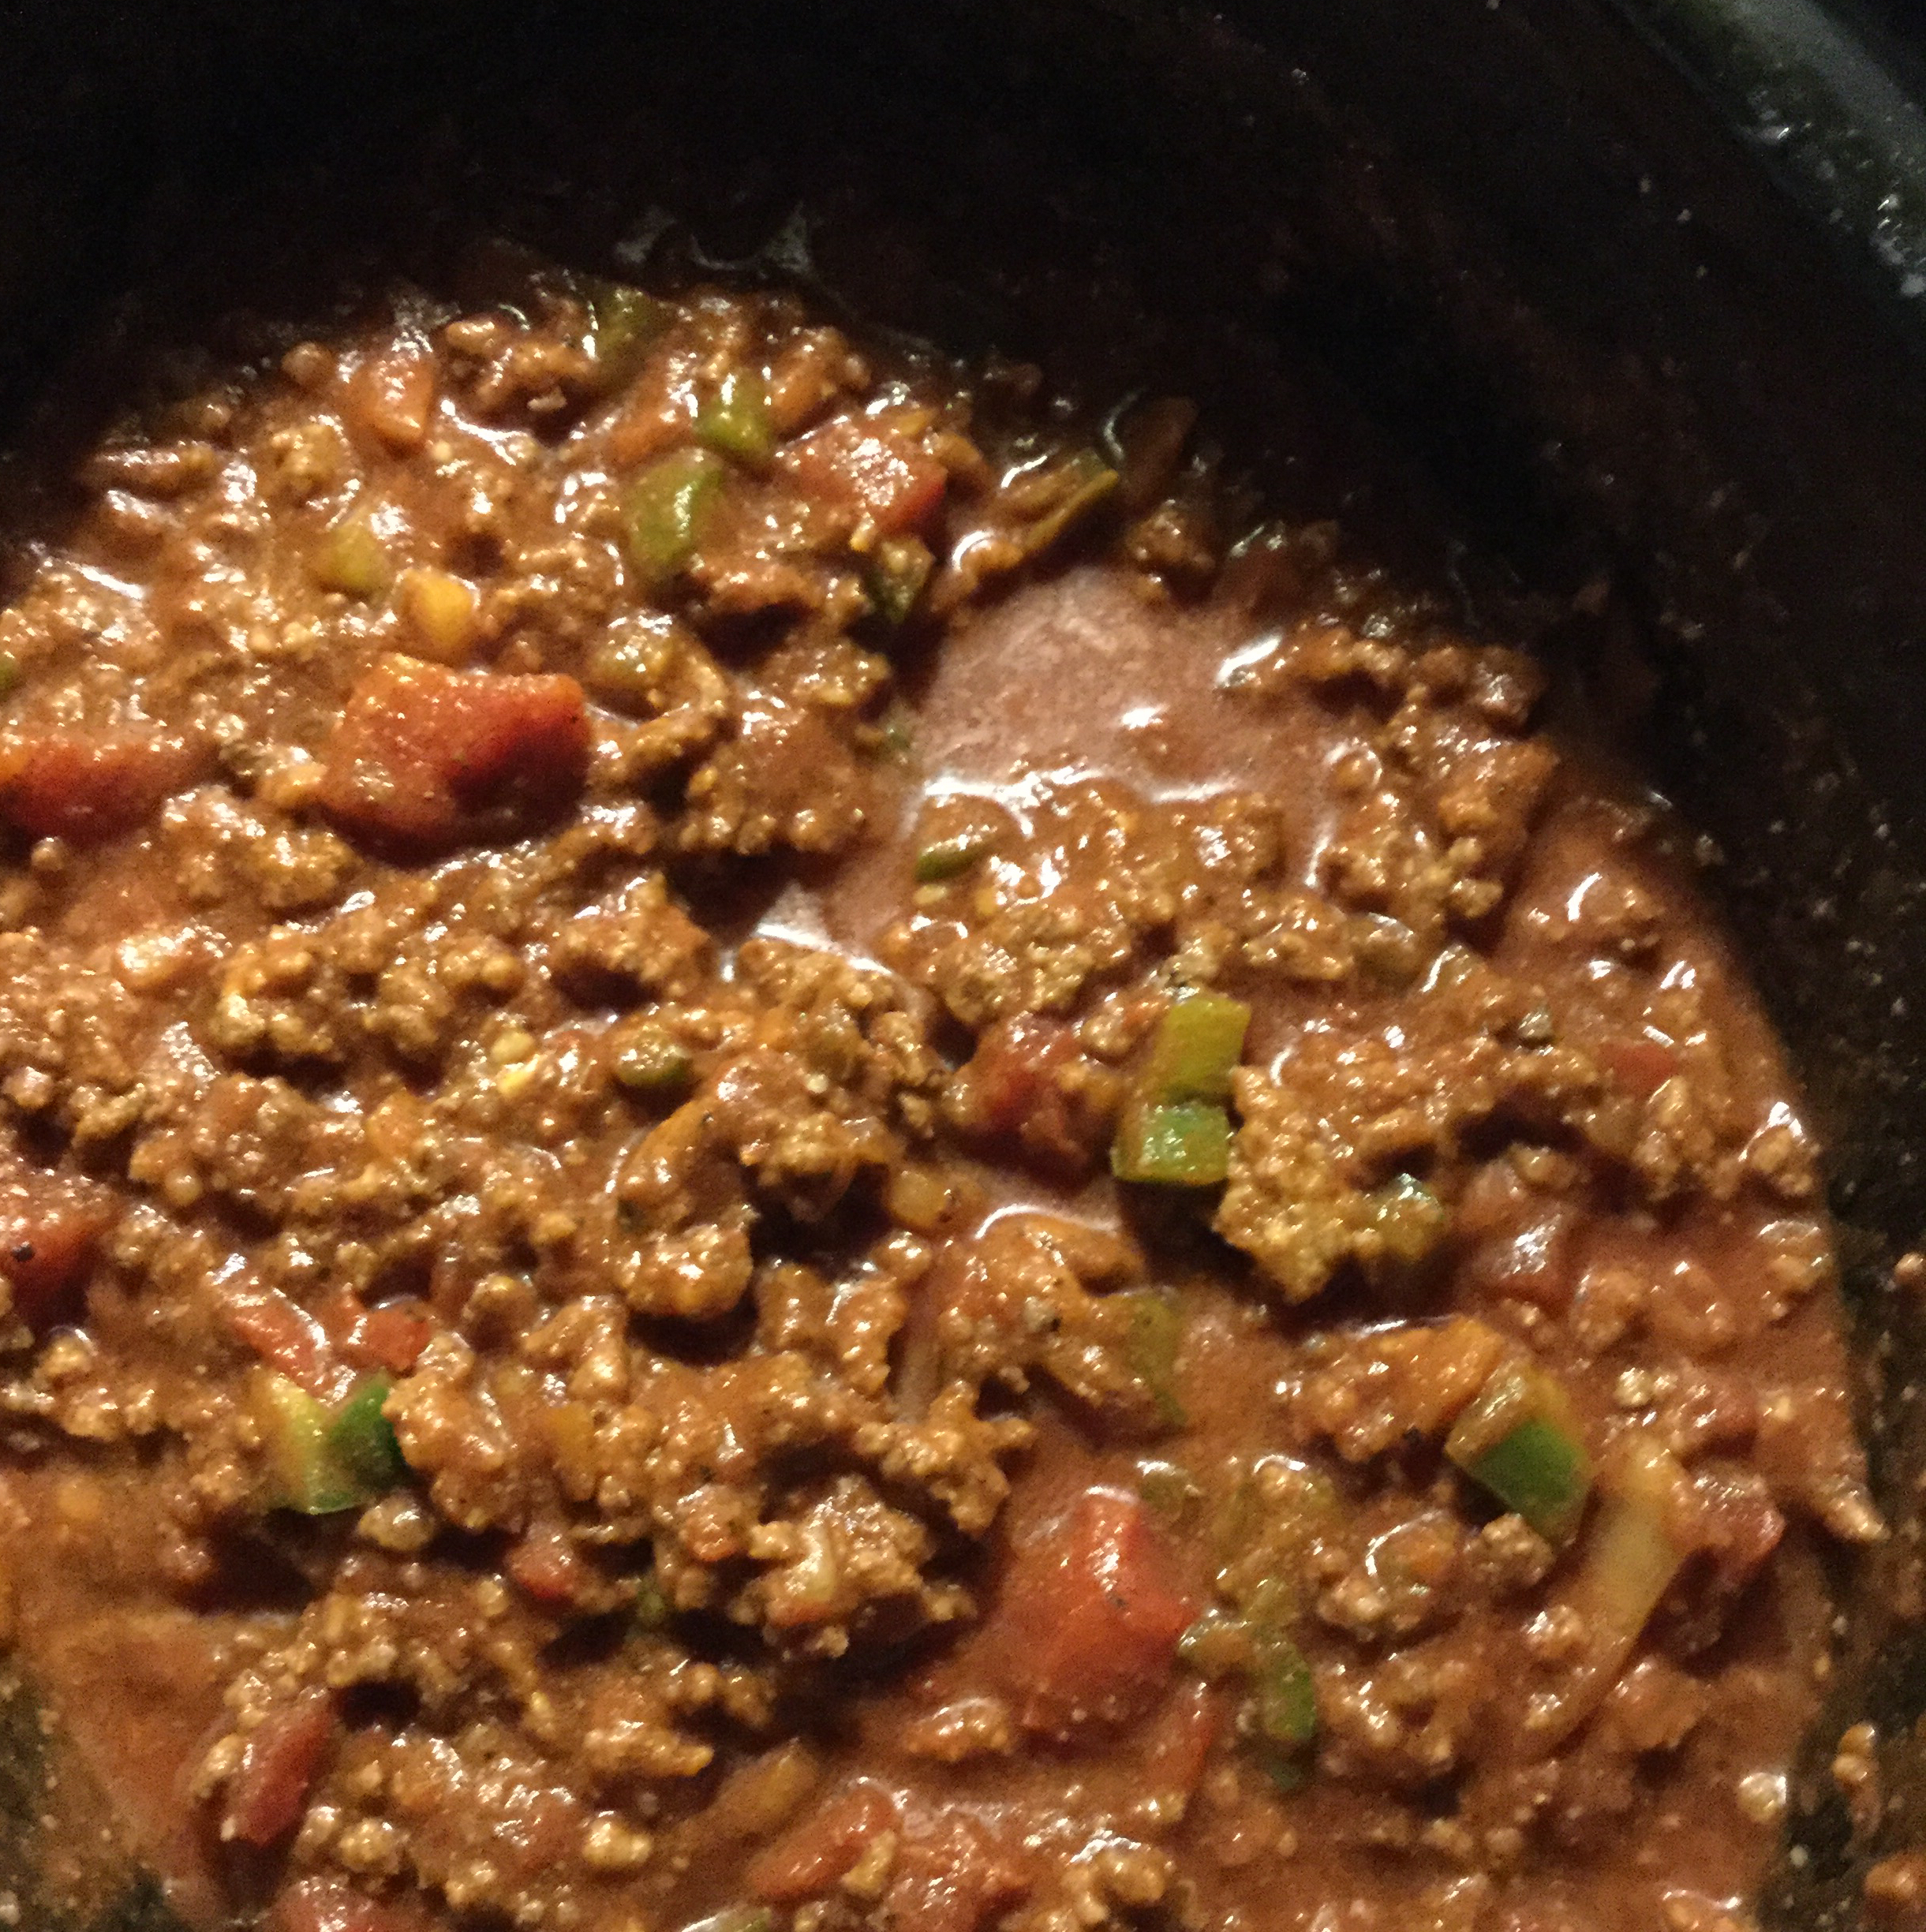 Spicy Slow Cooked Beanless Chili Recipe Allrecipes